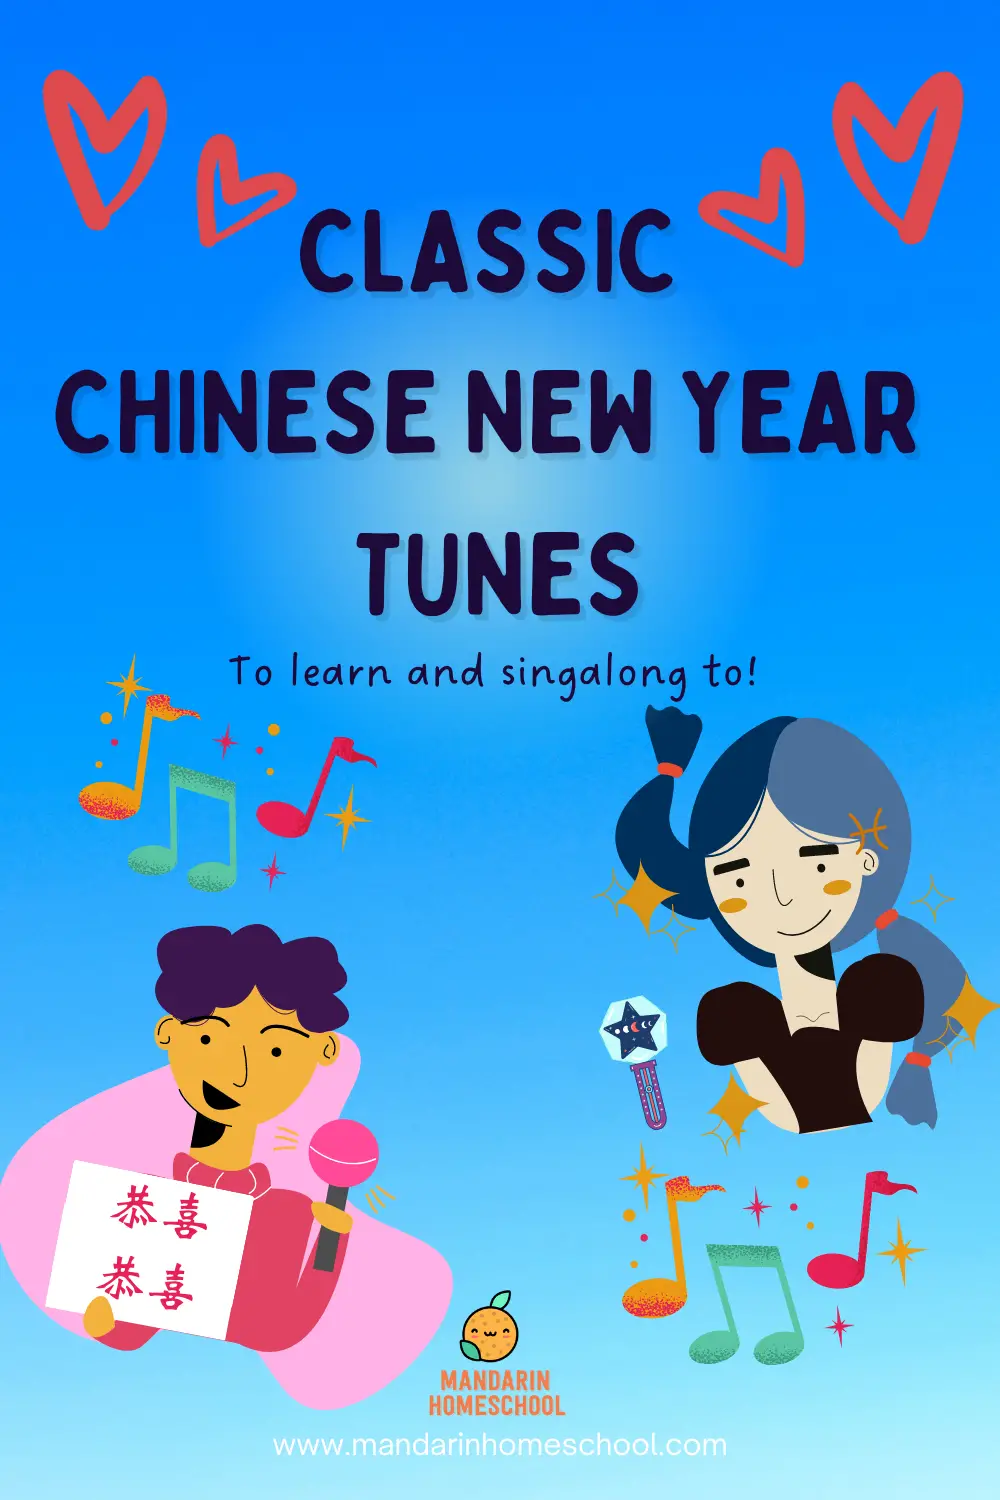 7 classic Chinese New Year songs to learn and sing along as a family